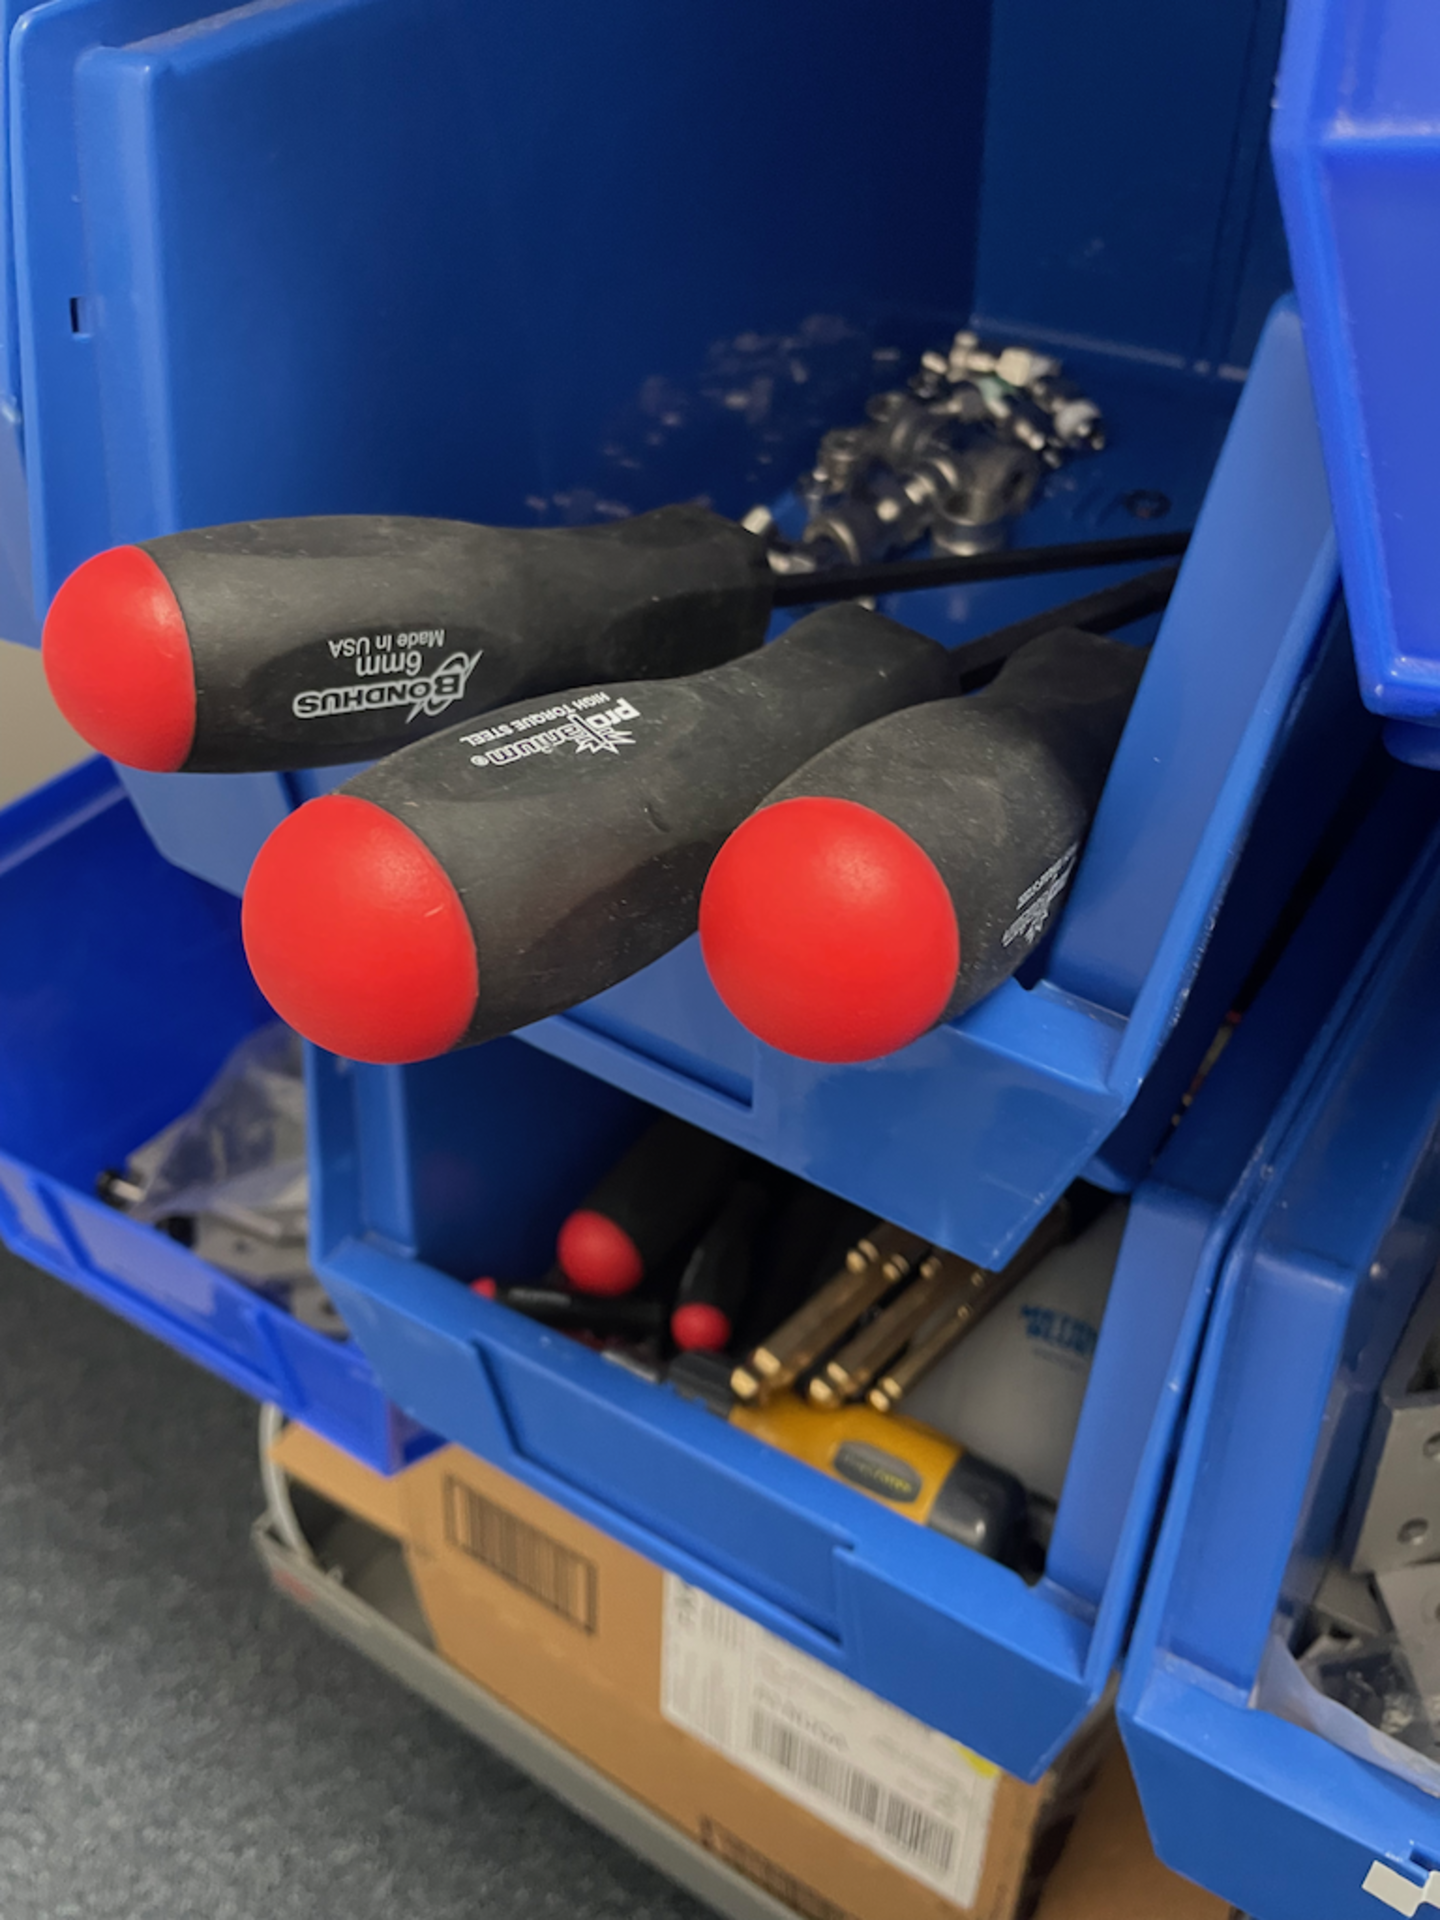 PORTABLE ULINE PARTS RACK WITH CONTENTS OF BLUE TOTES - Image 10 of 22